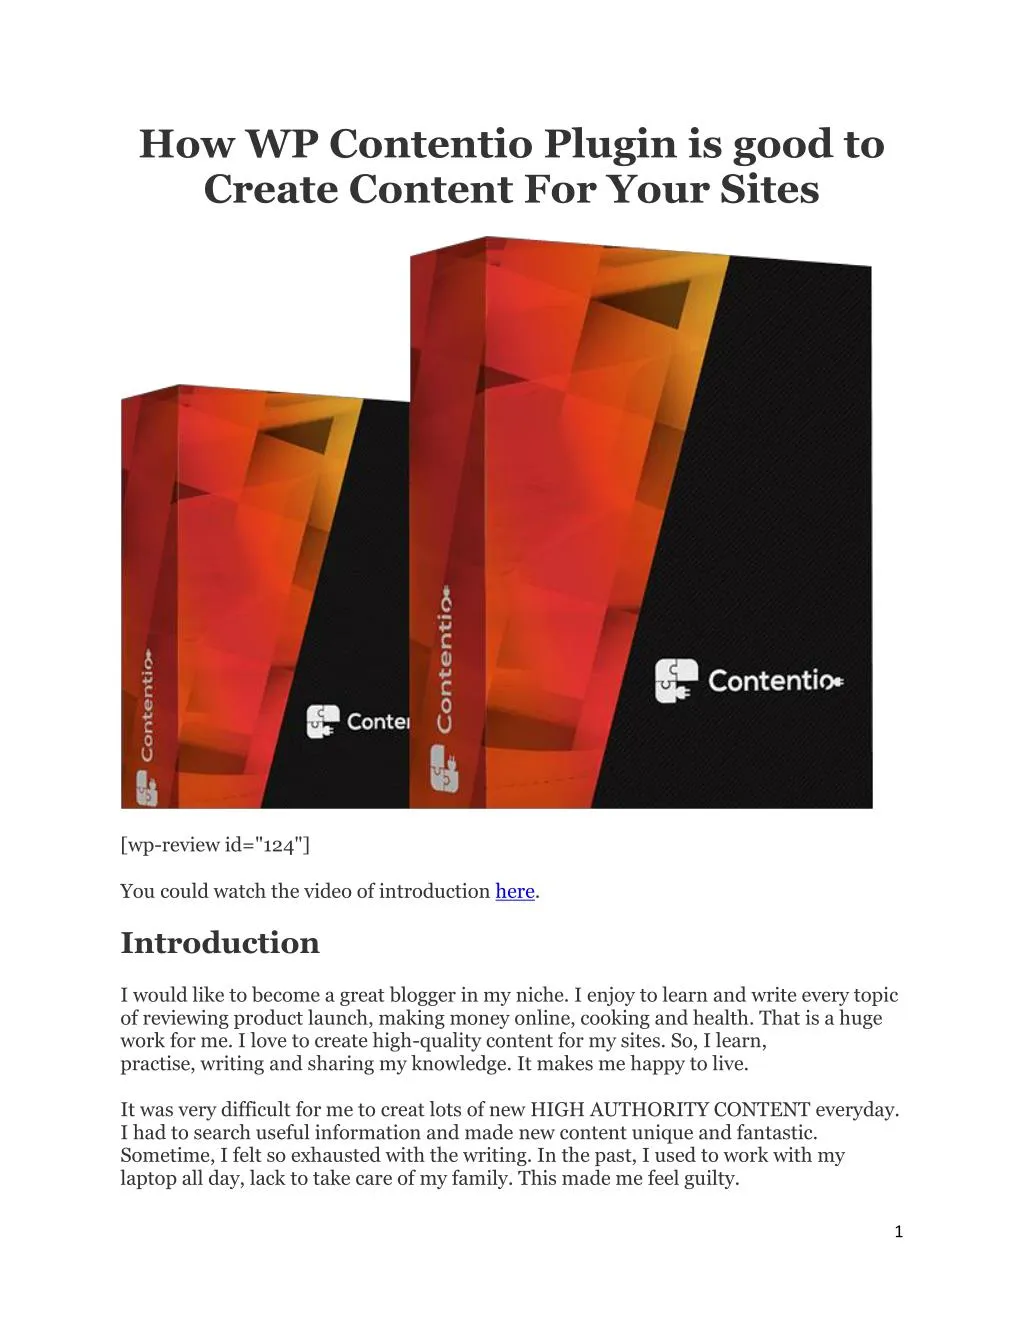 how wp contentio plugin is good to create content